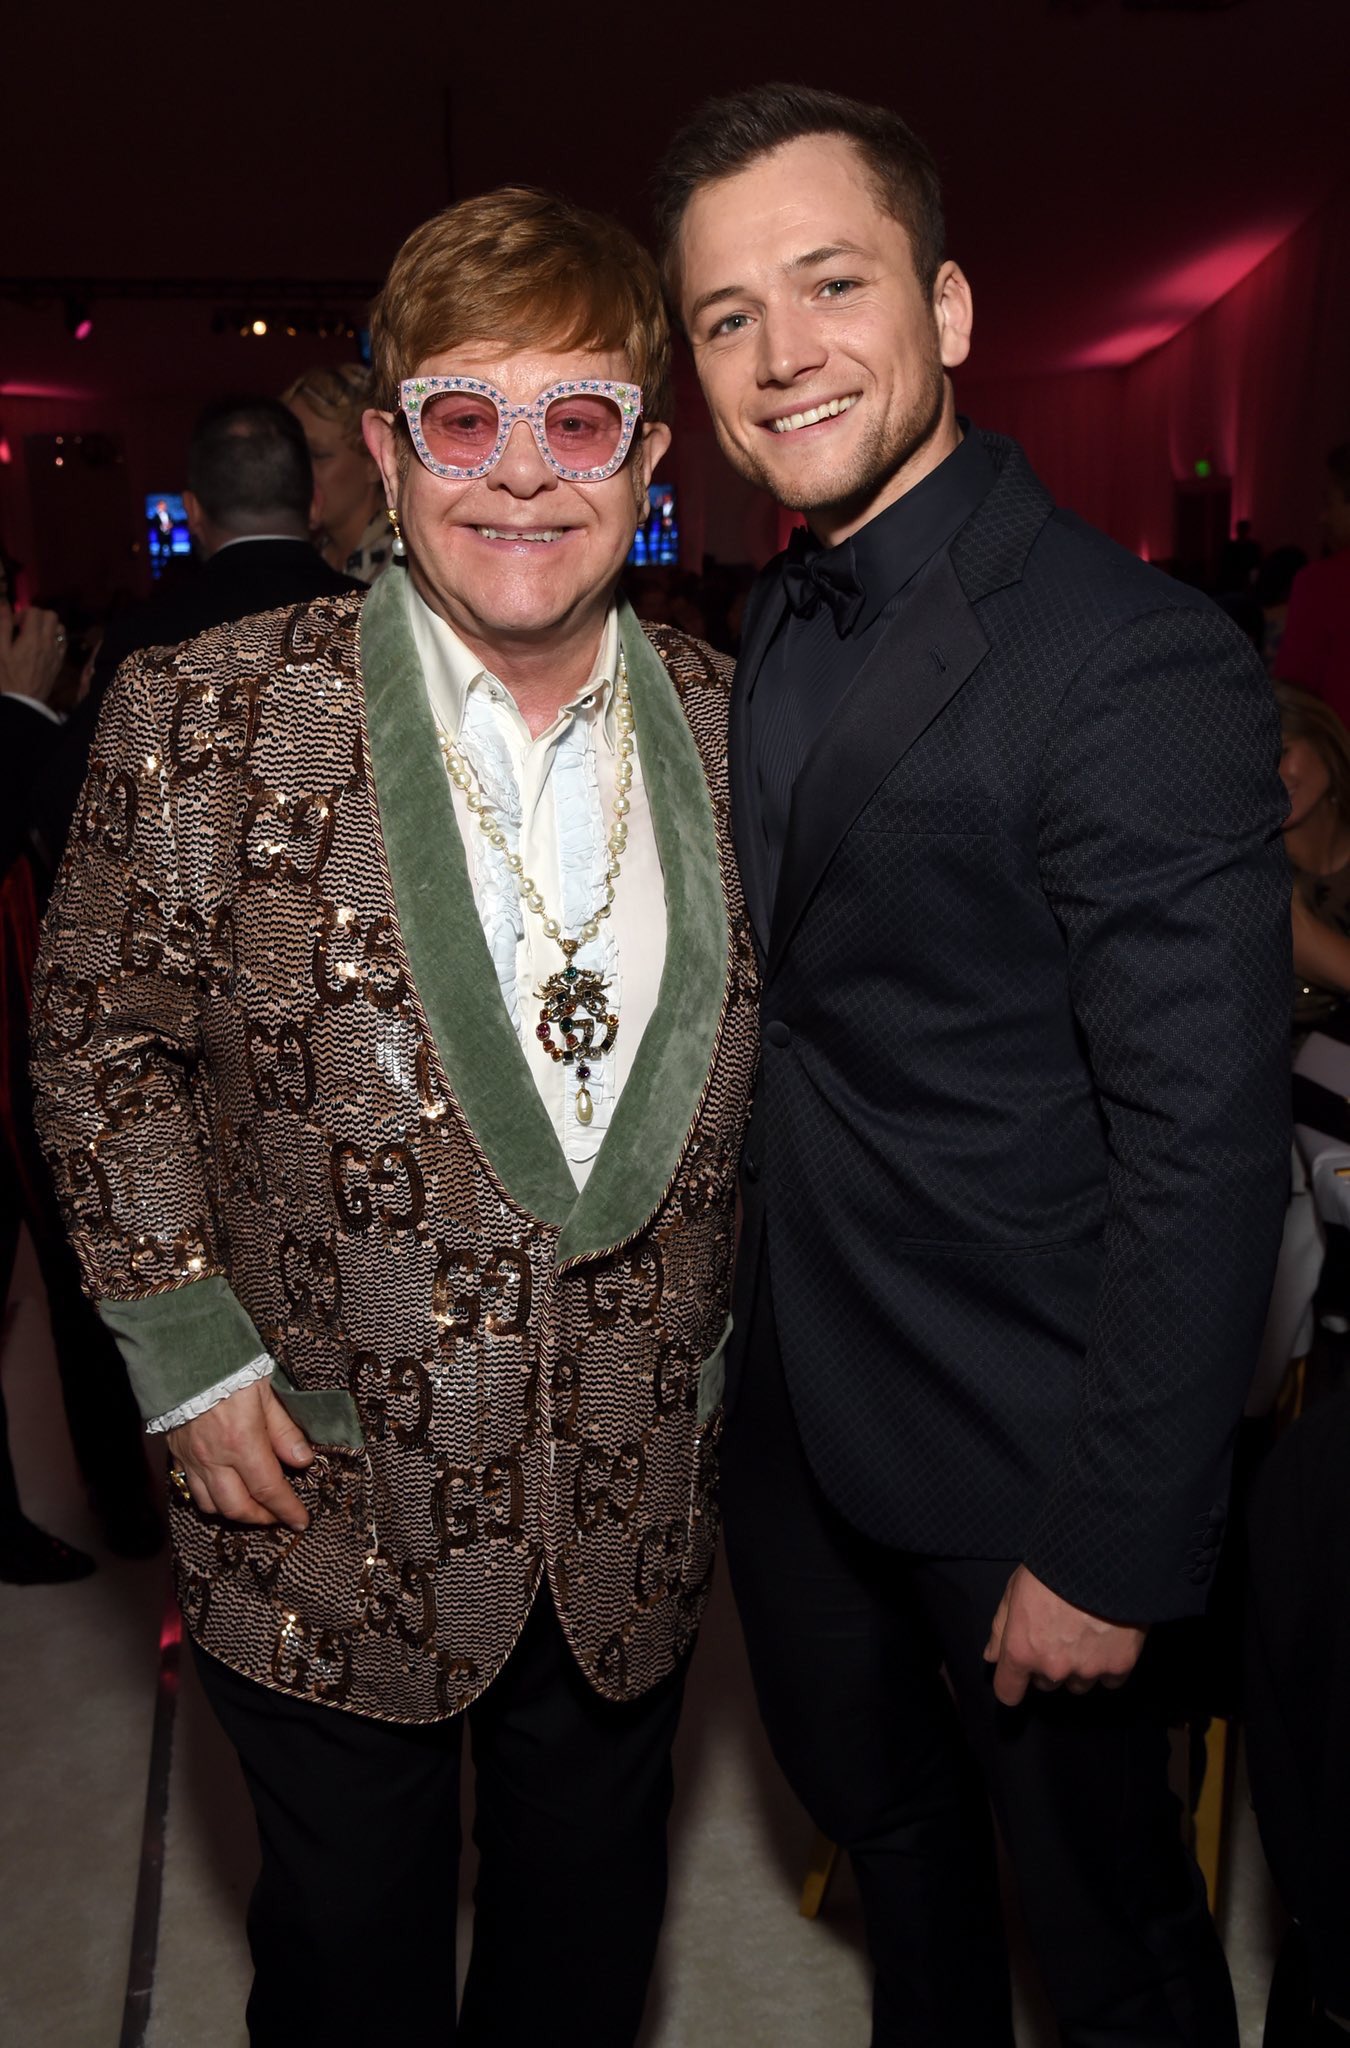 The biggest happy birthday to Sir Elton John! Rocketman will change everything for our guy this May. 